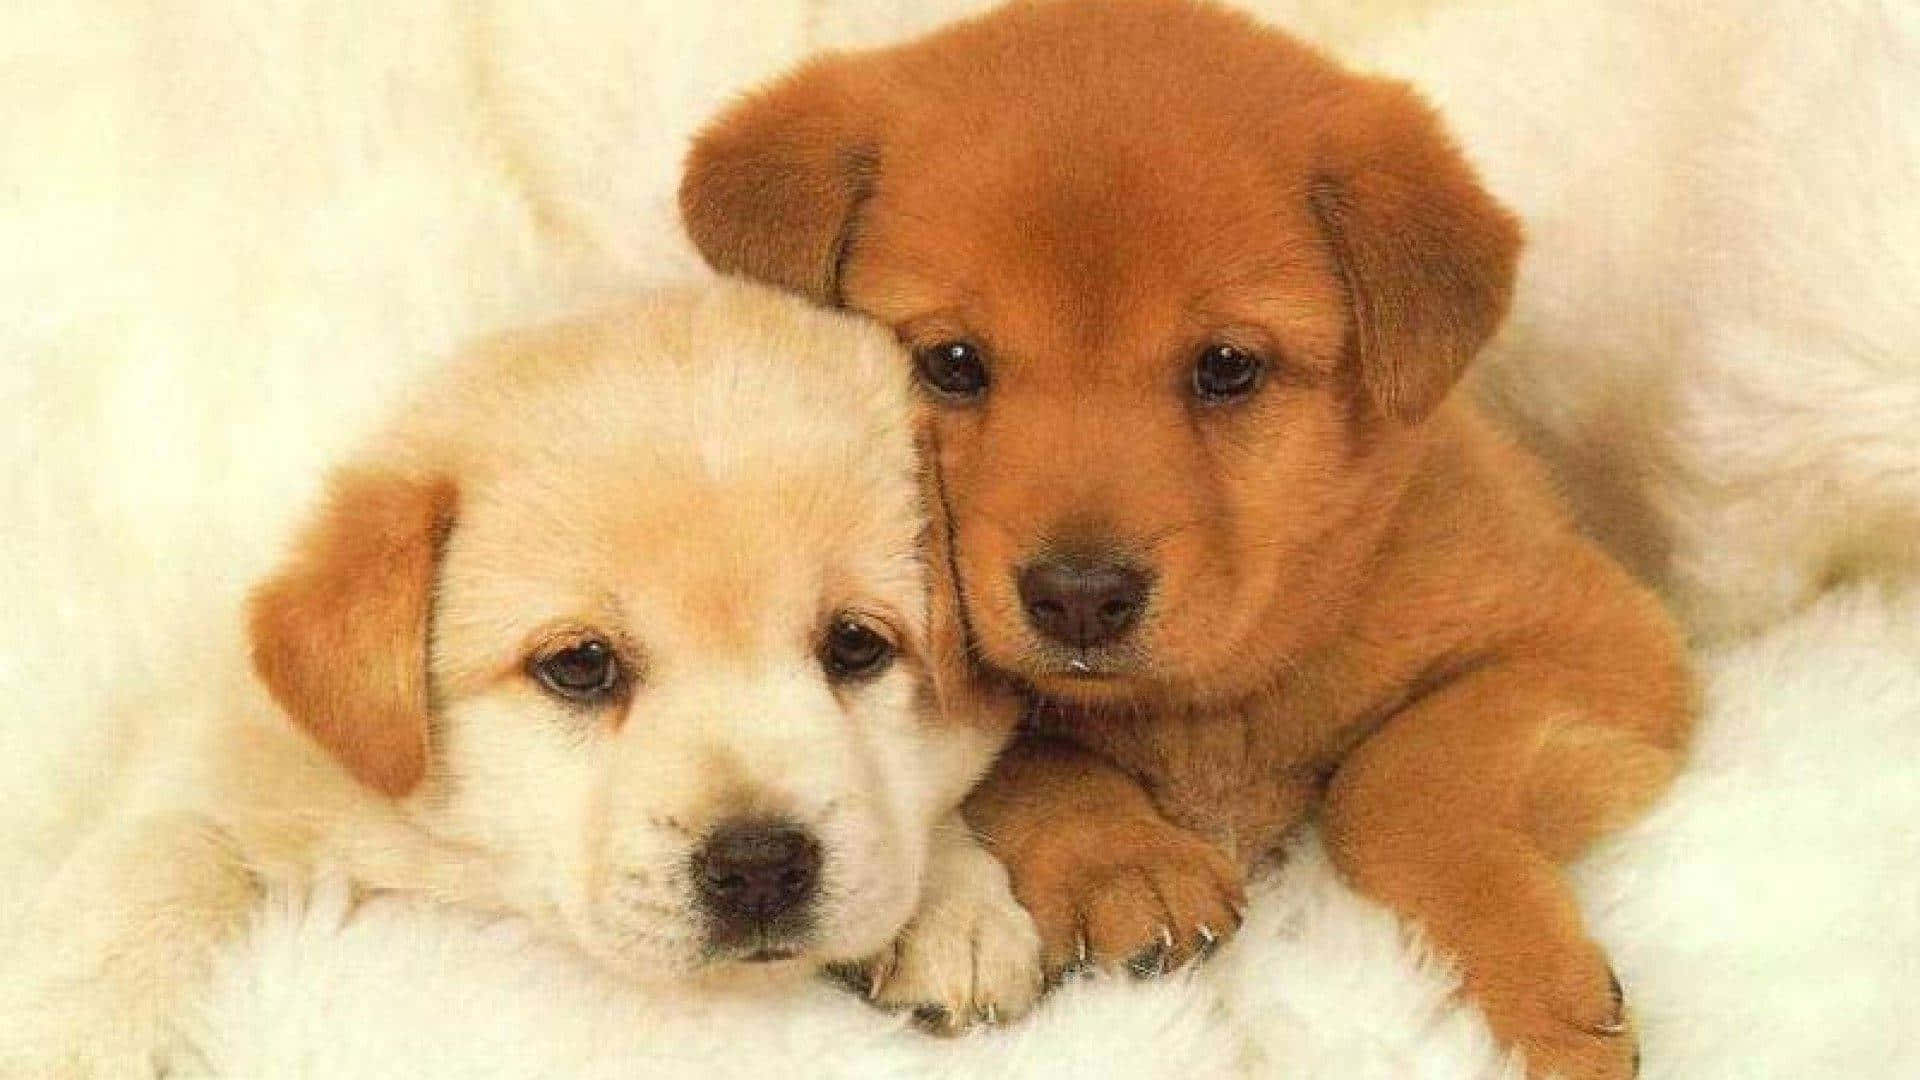 Two Puppies Laying On A White Fur Blanket